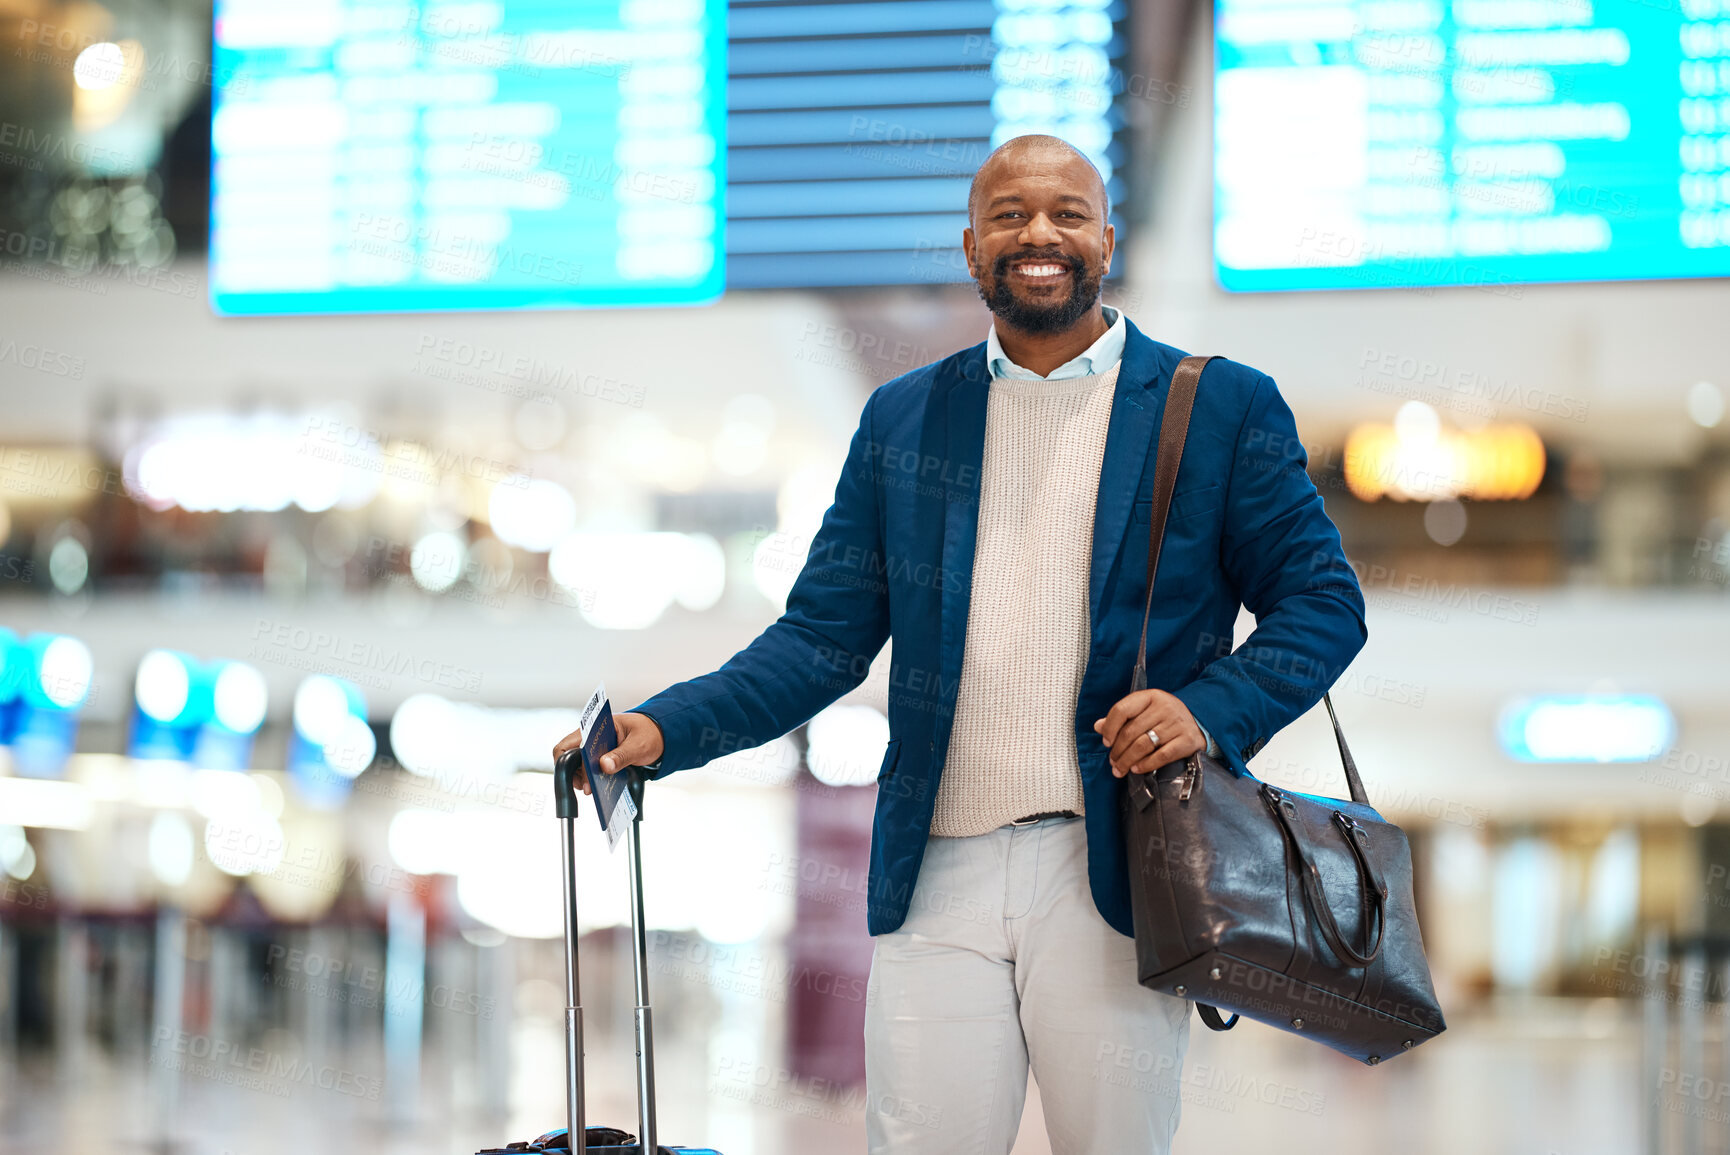 Buy stock photo Portrait of black man, airport and smile with luggage and flight schedule display for business trip. Happiness, travel and happy businessman standing in terminal with foreign country destination.